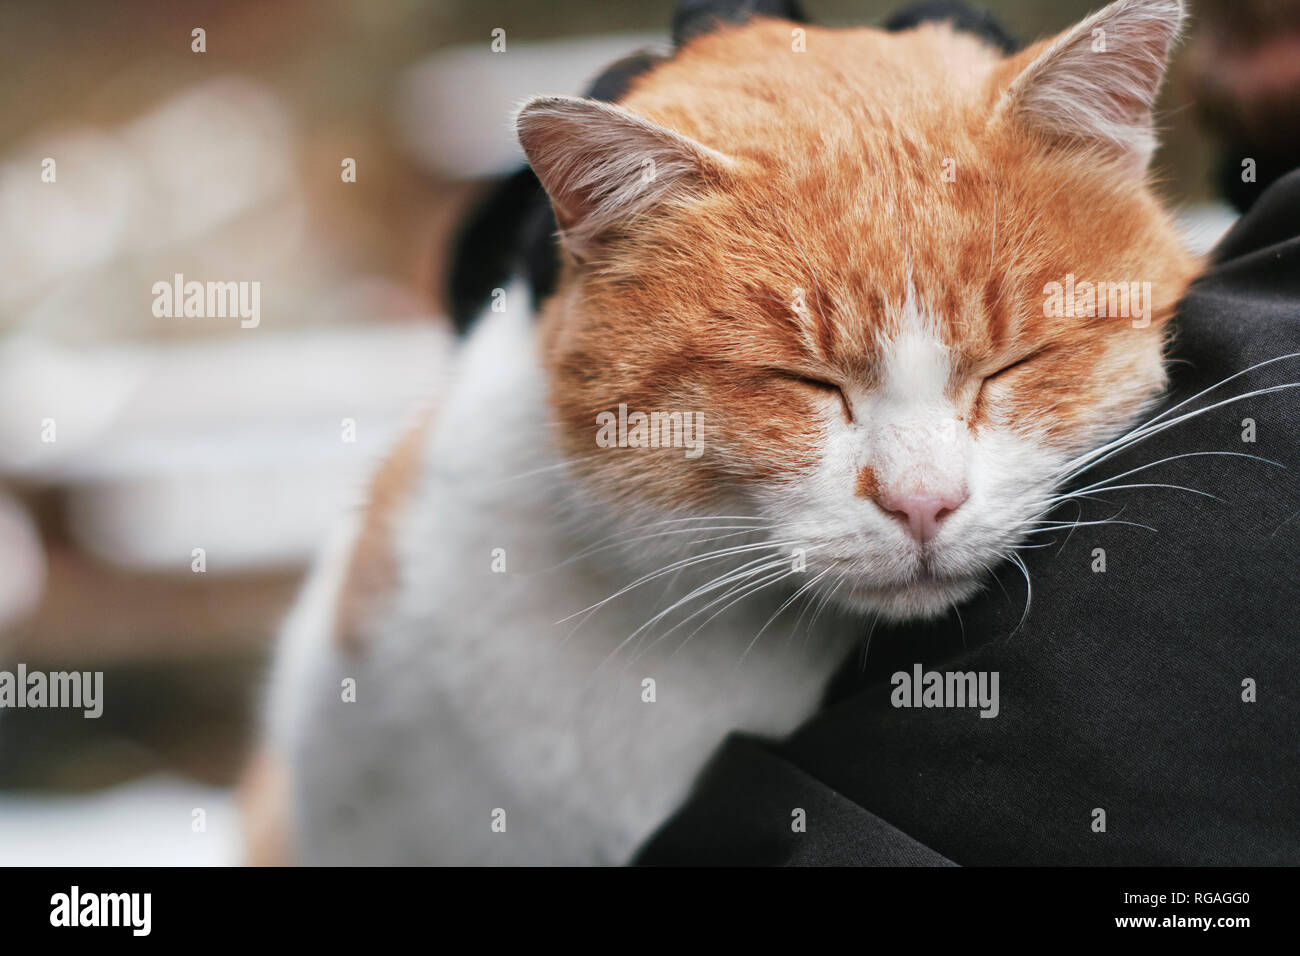 Portrait of cat relaxing with head on shoulder of owner Stock Photo